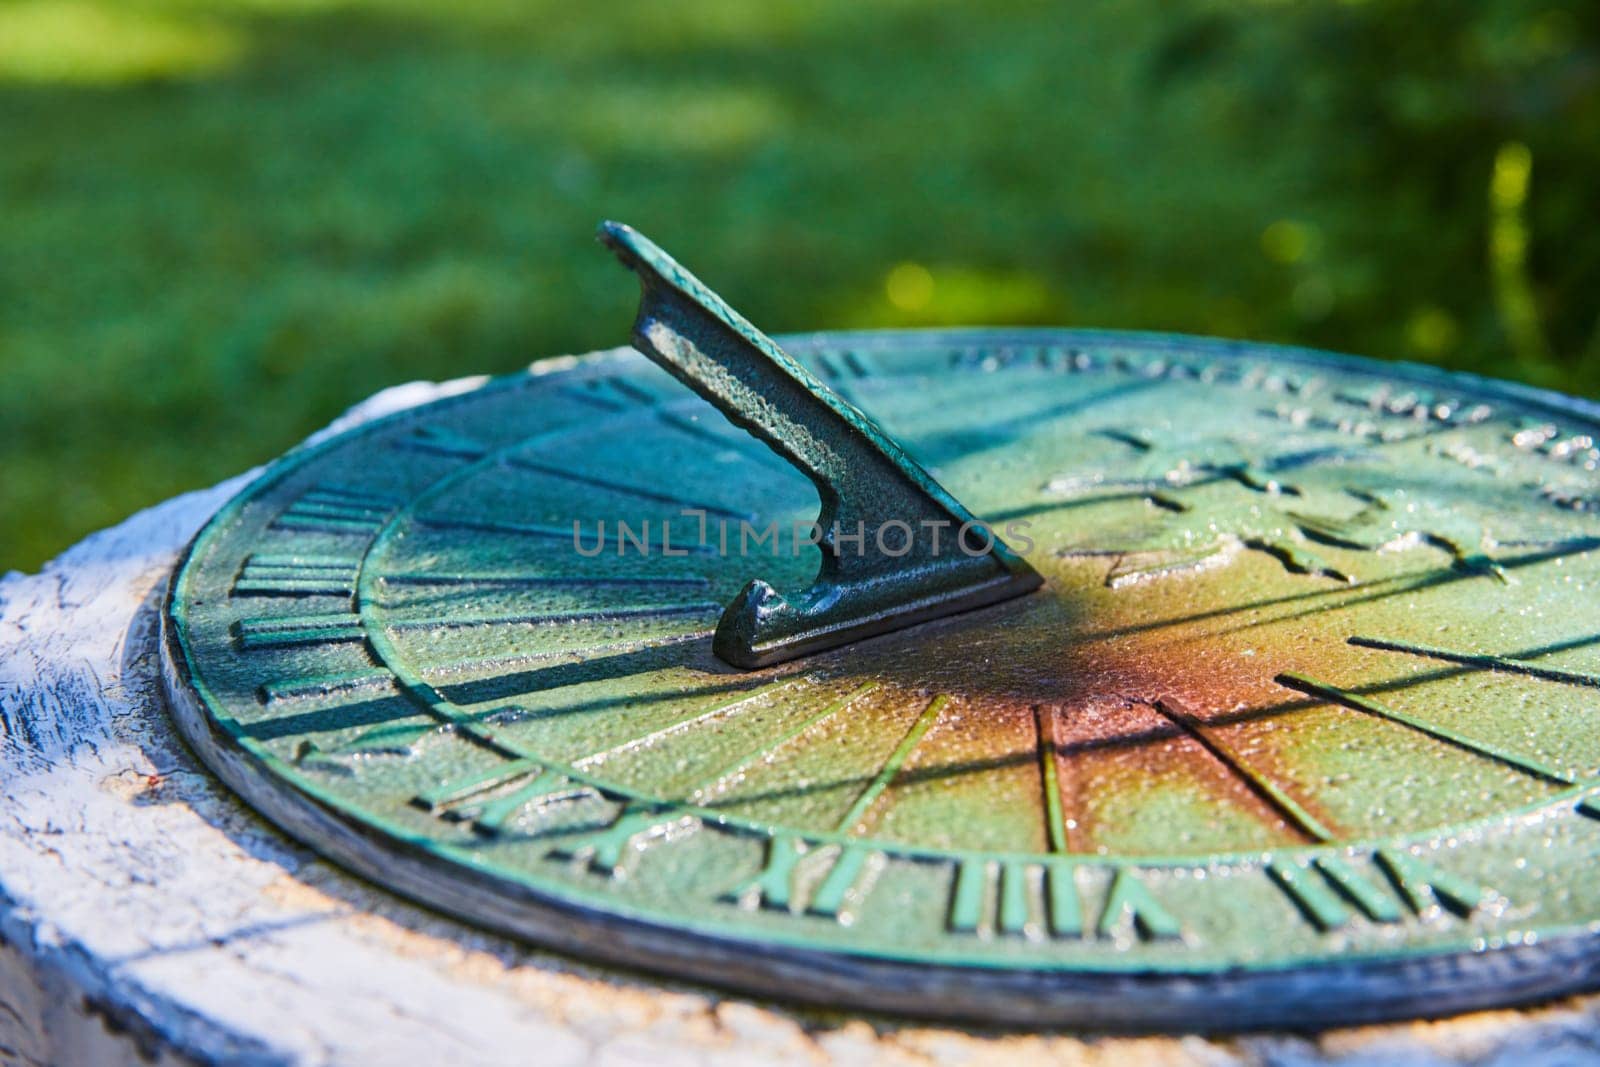 Verdigris Sundial in Garden Light, Close-Up View by njproductions